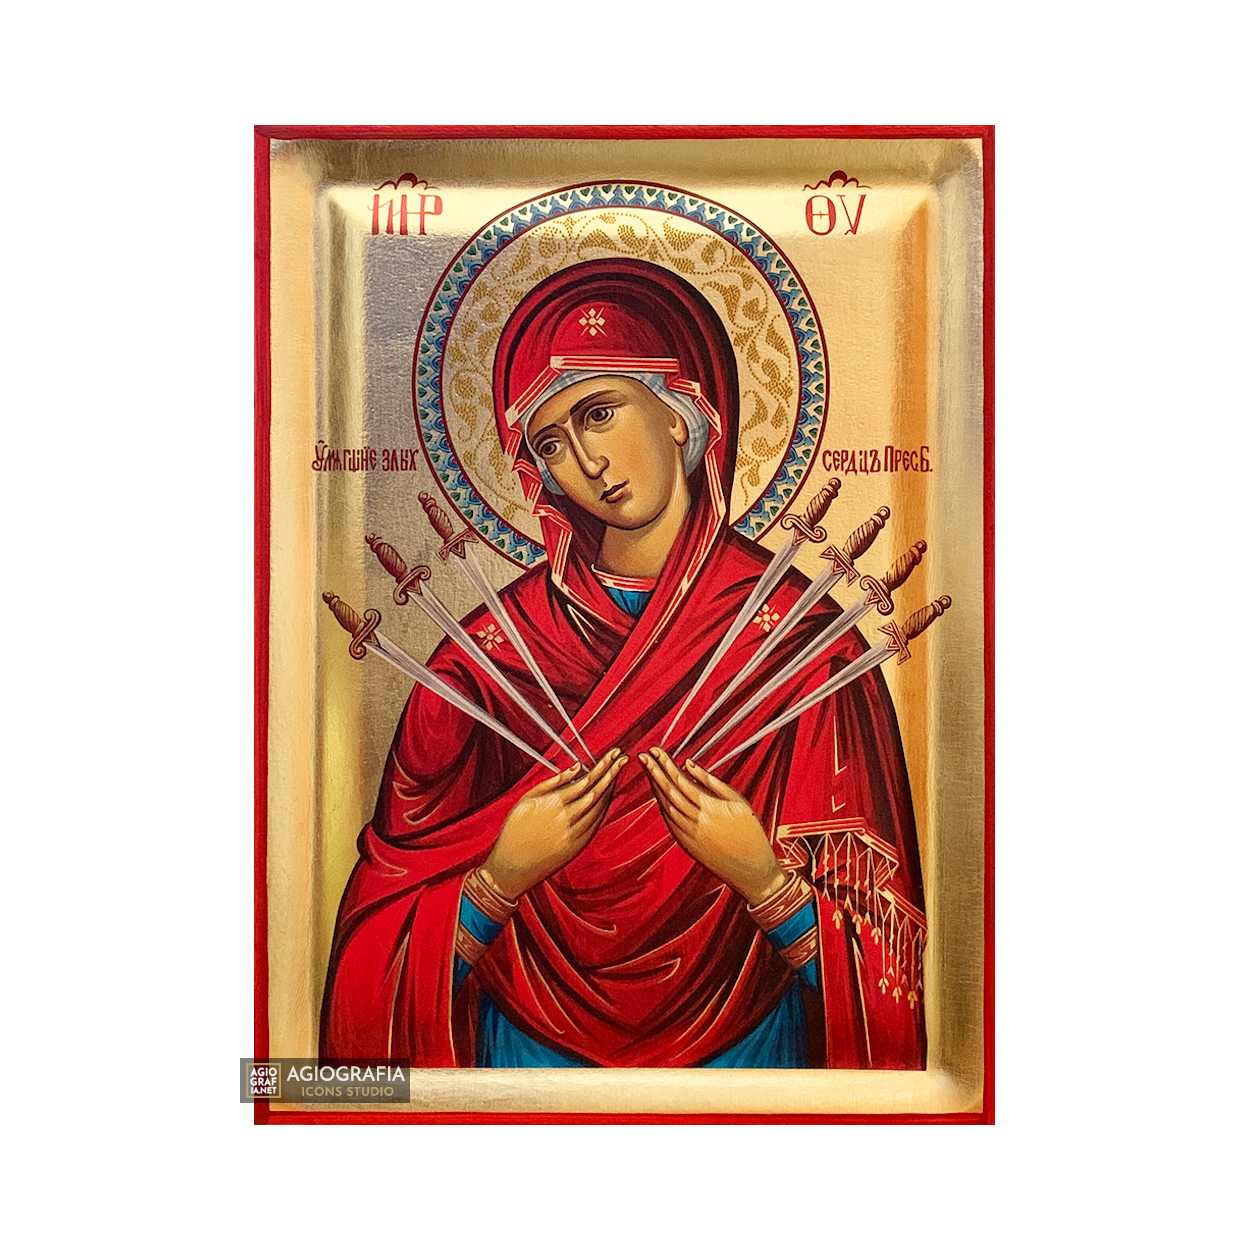 Virgin Mary with Seven Swords Greek Orthodox Icon with Gold Leaf